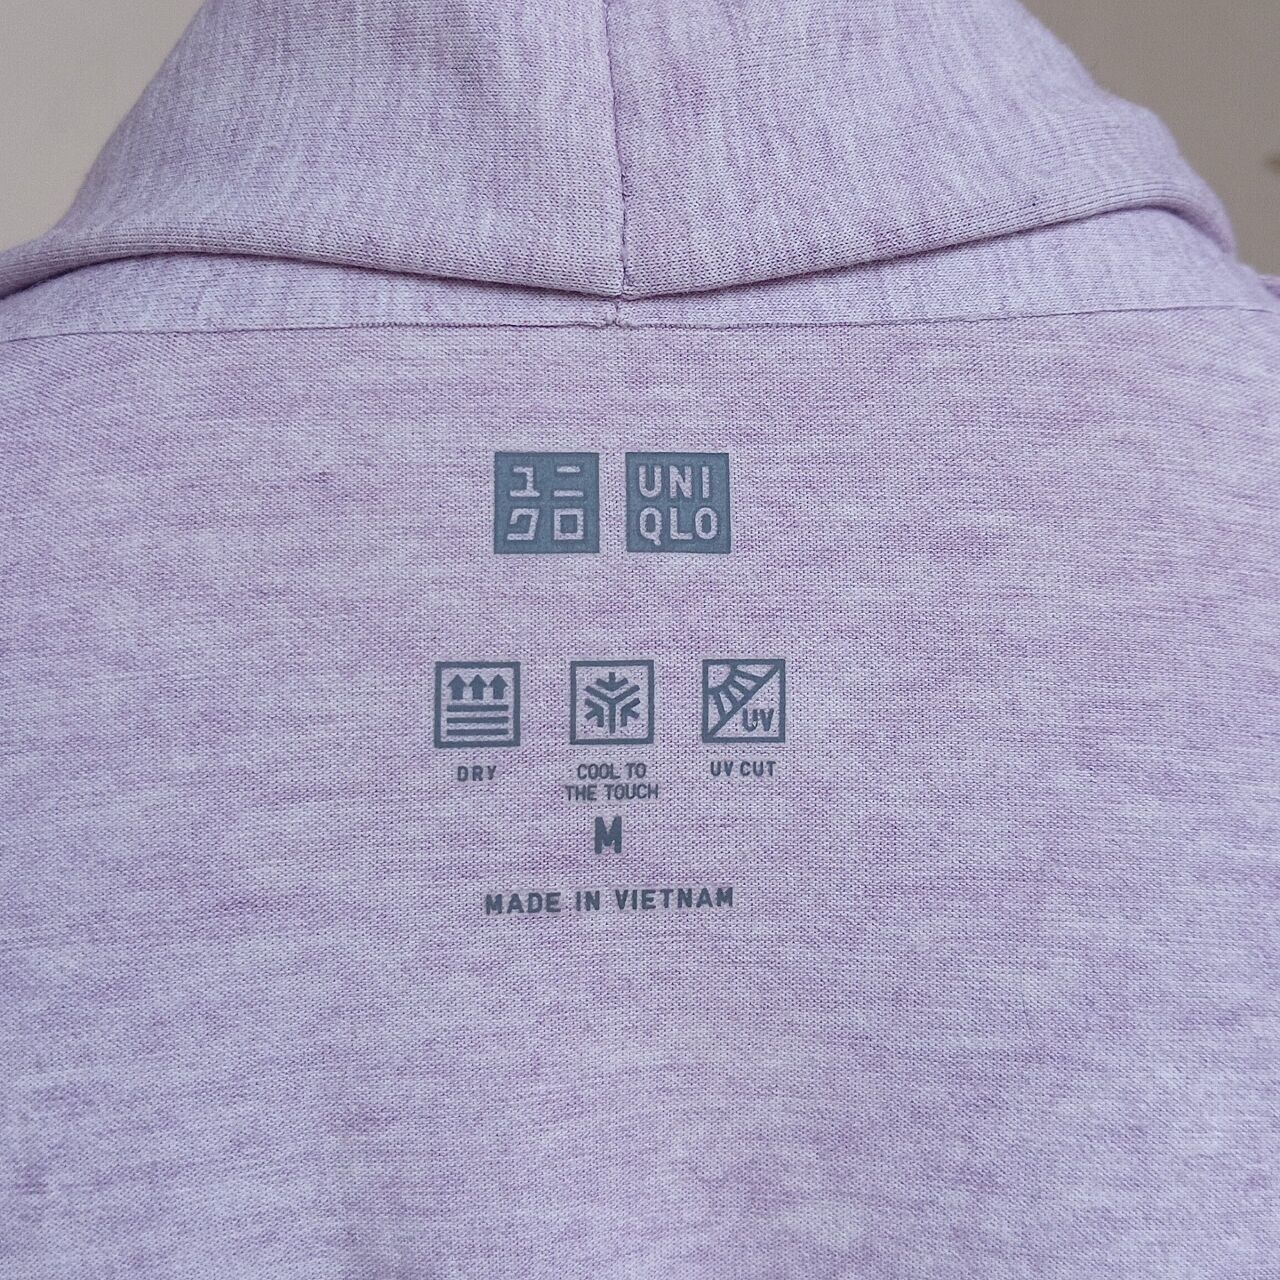 Uniqlo Airism Lilac Outer Wrap